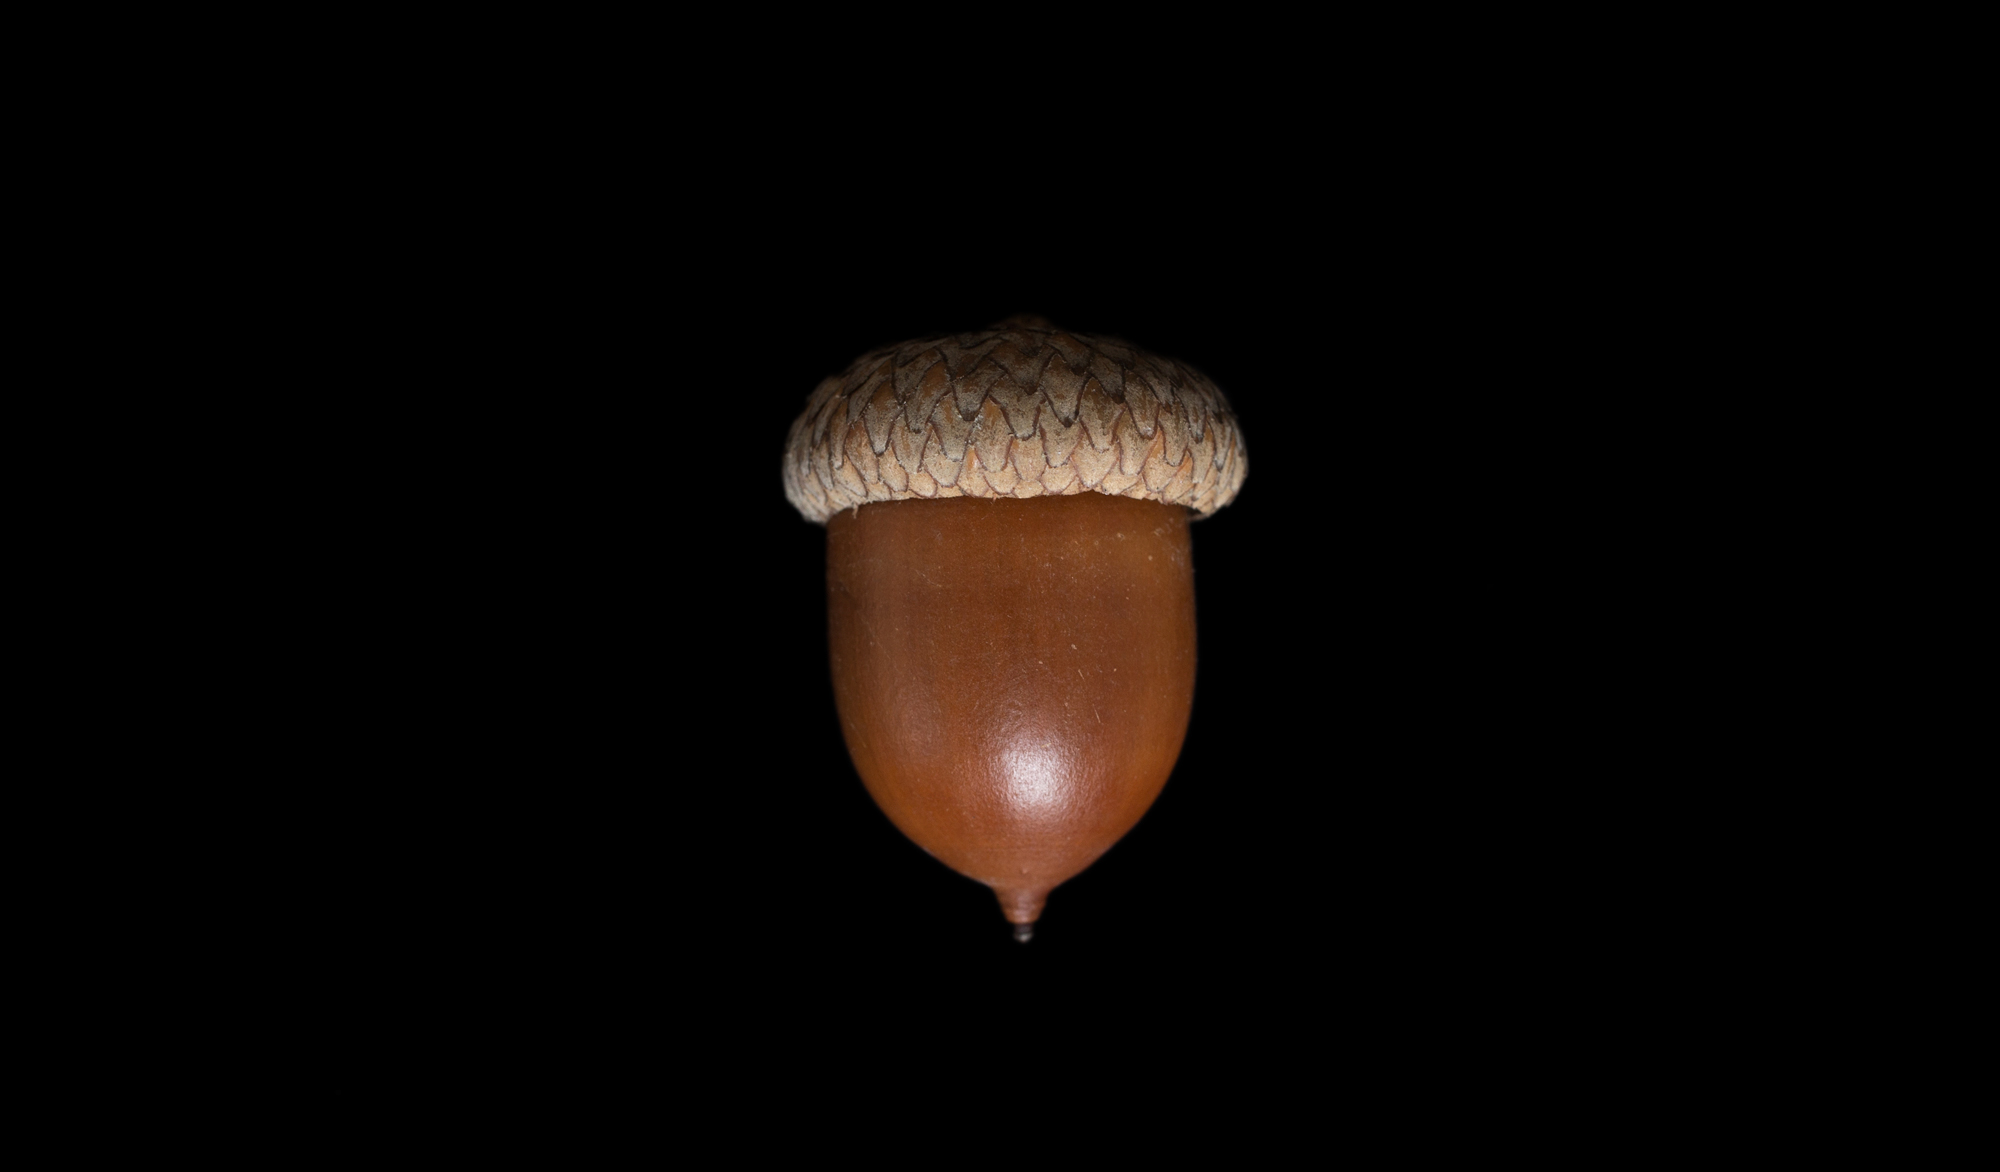 Revealing the Wonders Within Exploring the Intricacies of Acorns